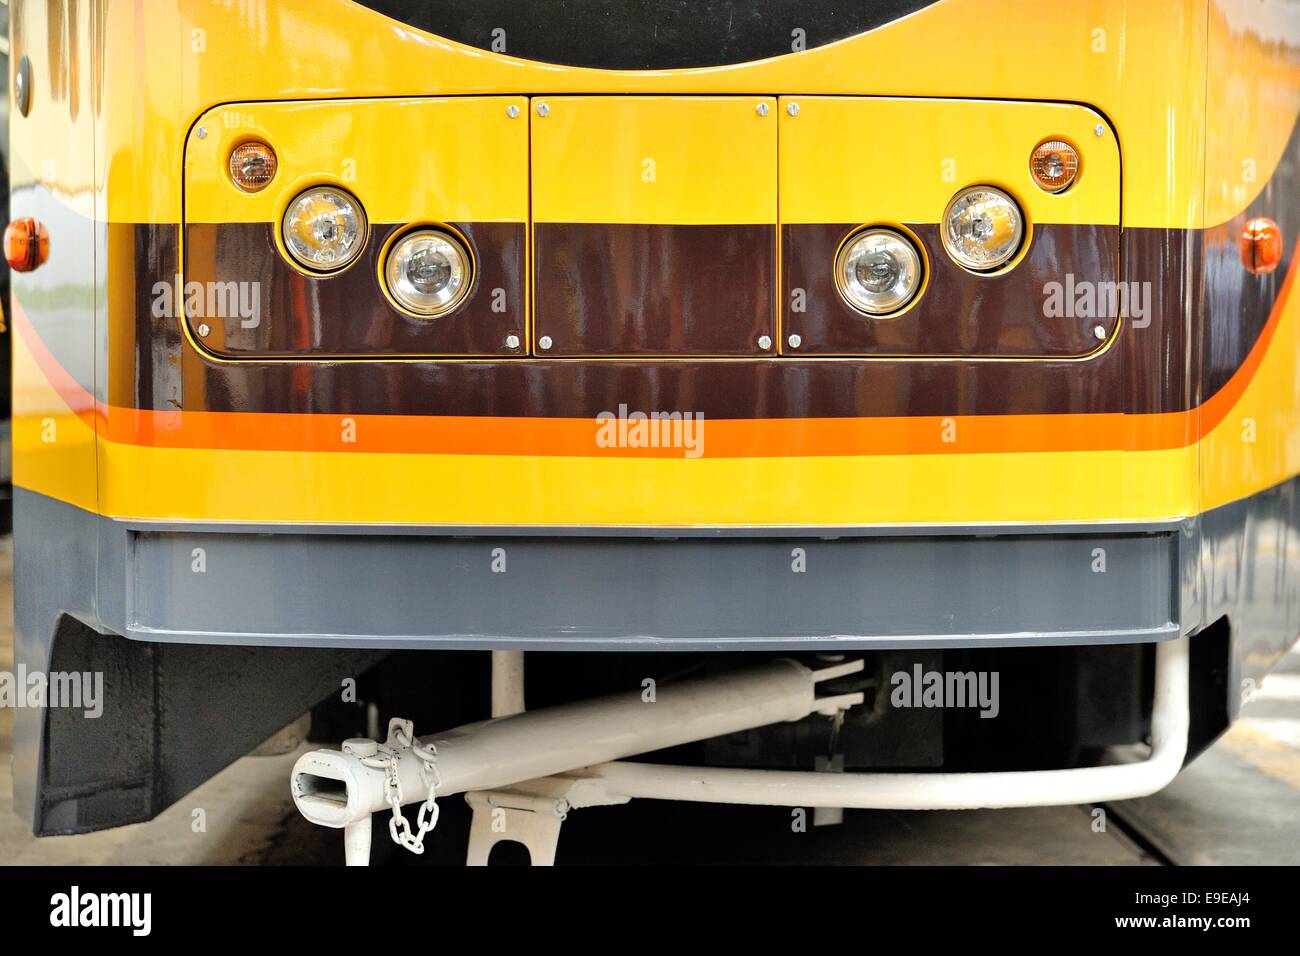 New ATM Class 4900 Tram (nose detail). Milan, Italy Stock Photo